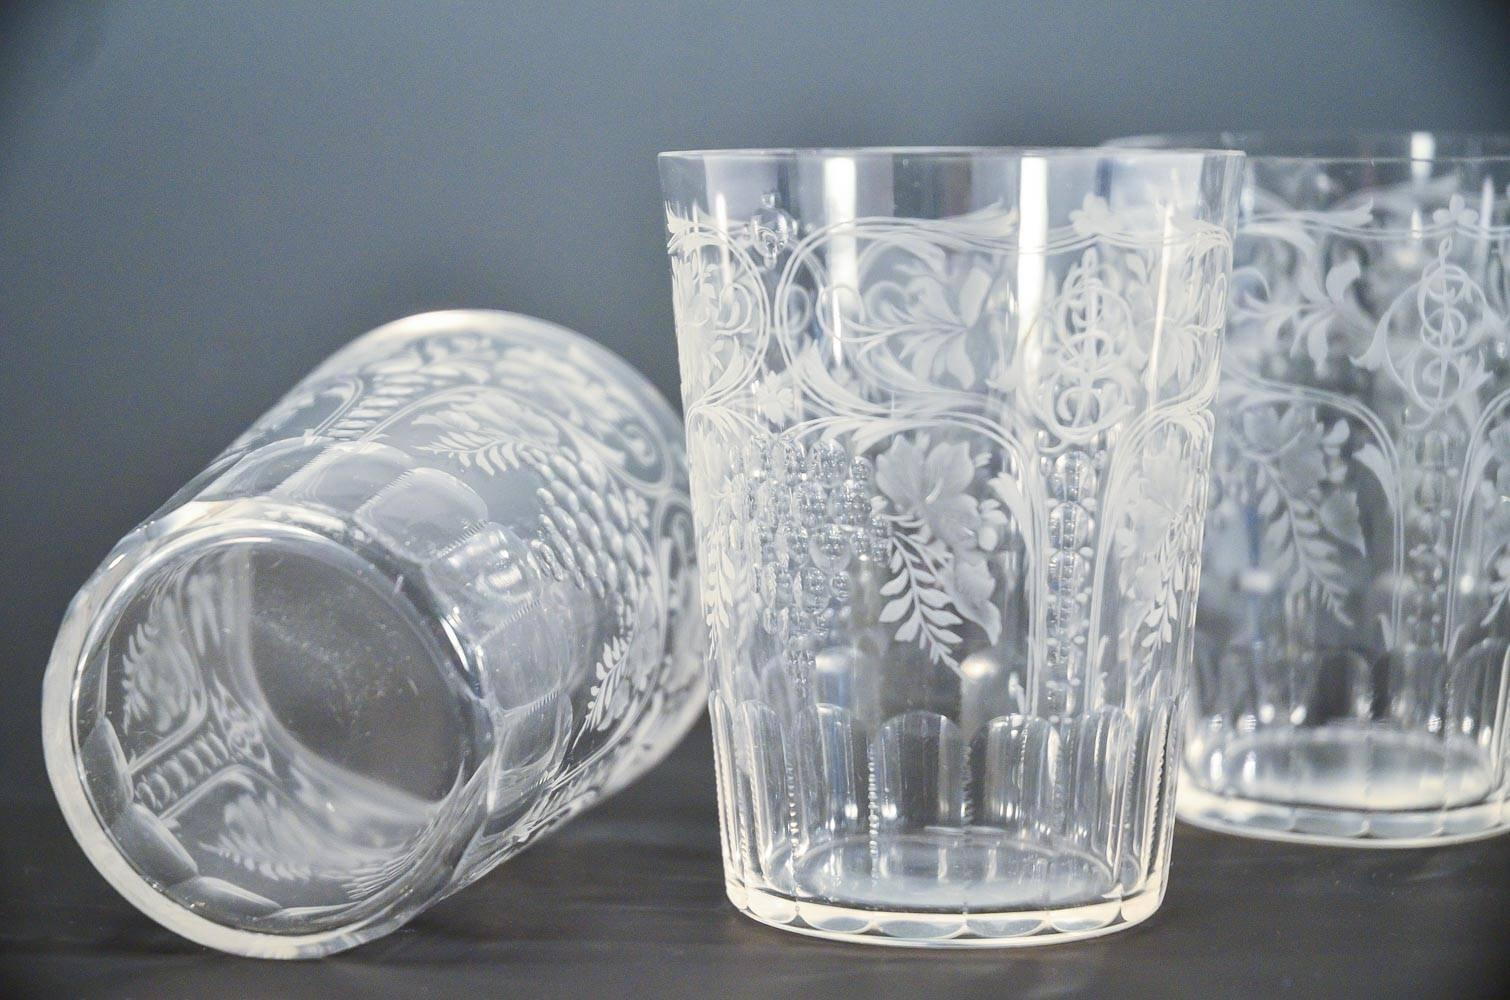 These are the perfect set of 10 wheel cut tumblers ready for your favorite cocktail. The special order glasses are hand blown crystal and masterfully engraved with an overall 